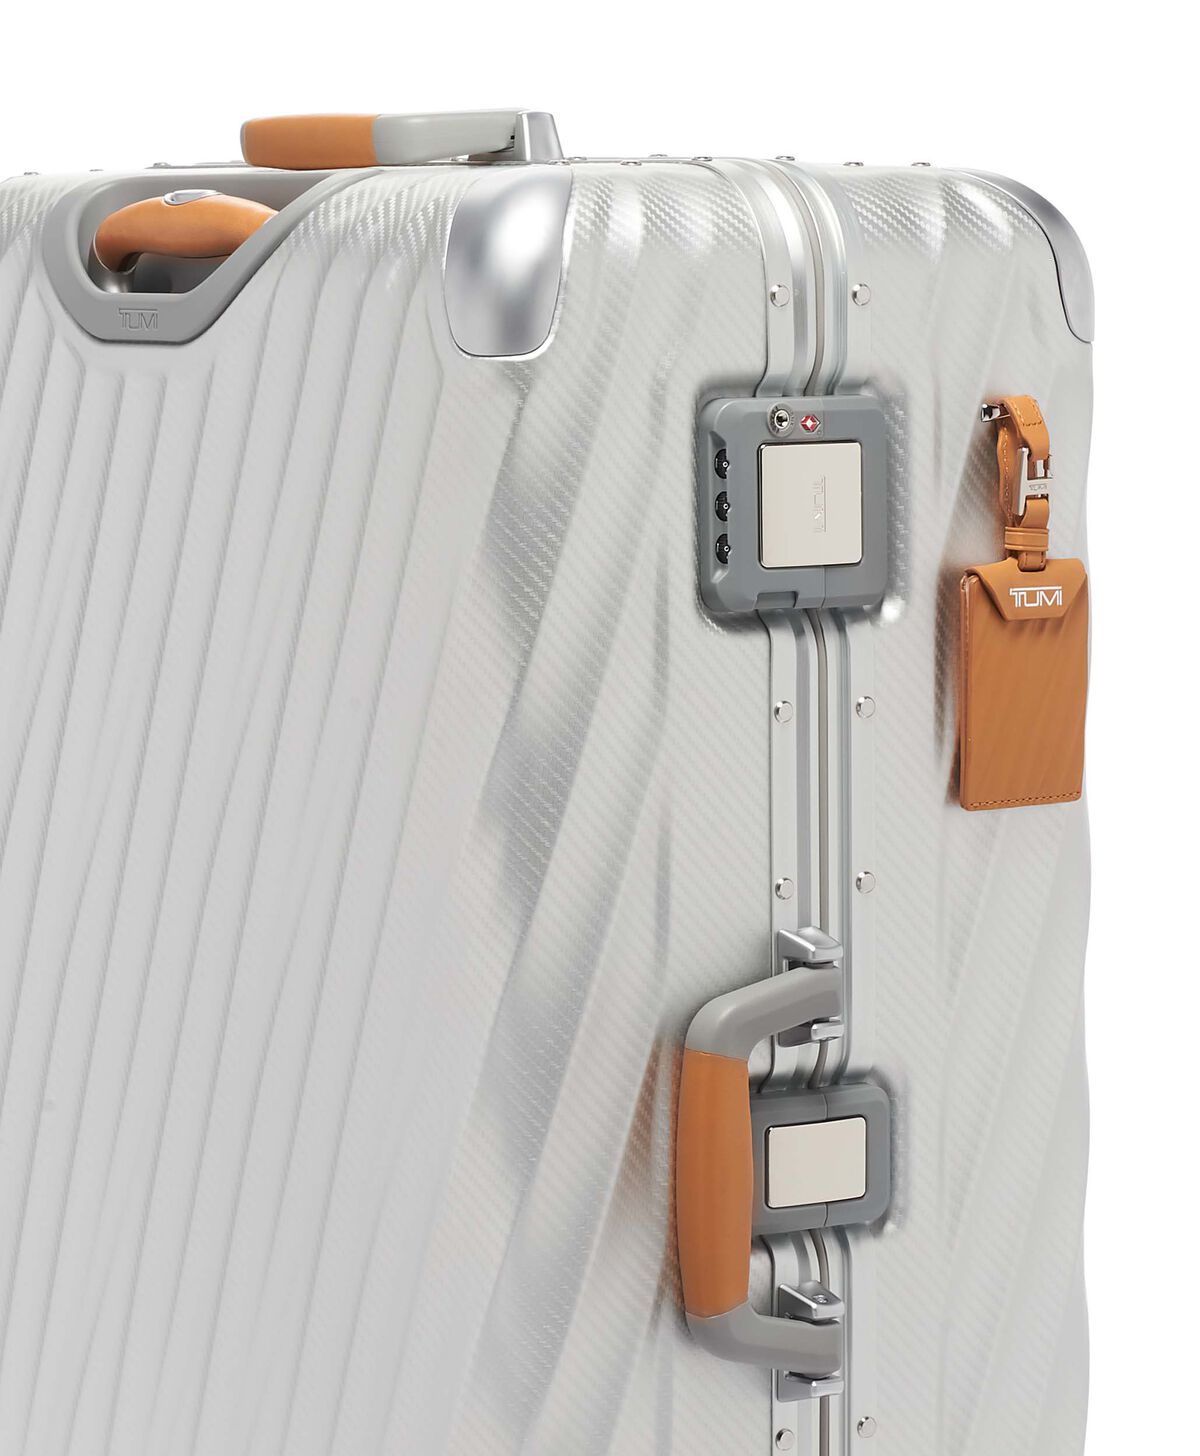 Tumi 19 Degree Aluminum EXTENDED TRIP PACKING  Texture Silver